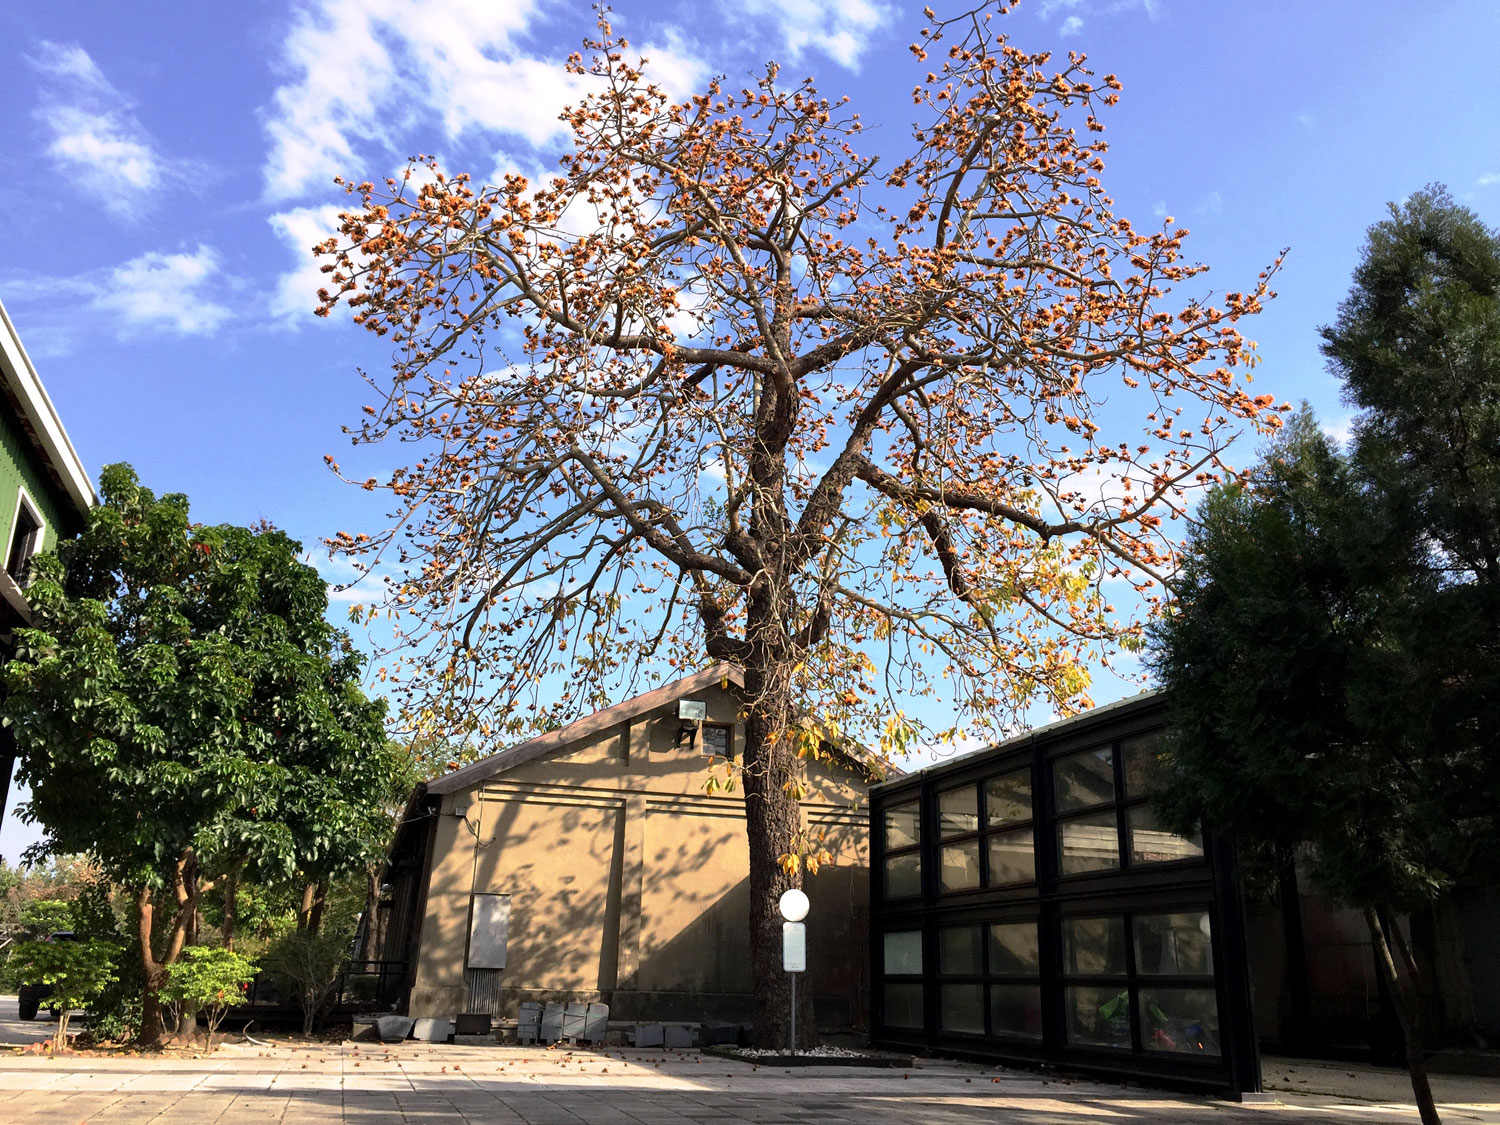 Siao-Long Cultural Park: hundred-year-old kapok tree